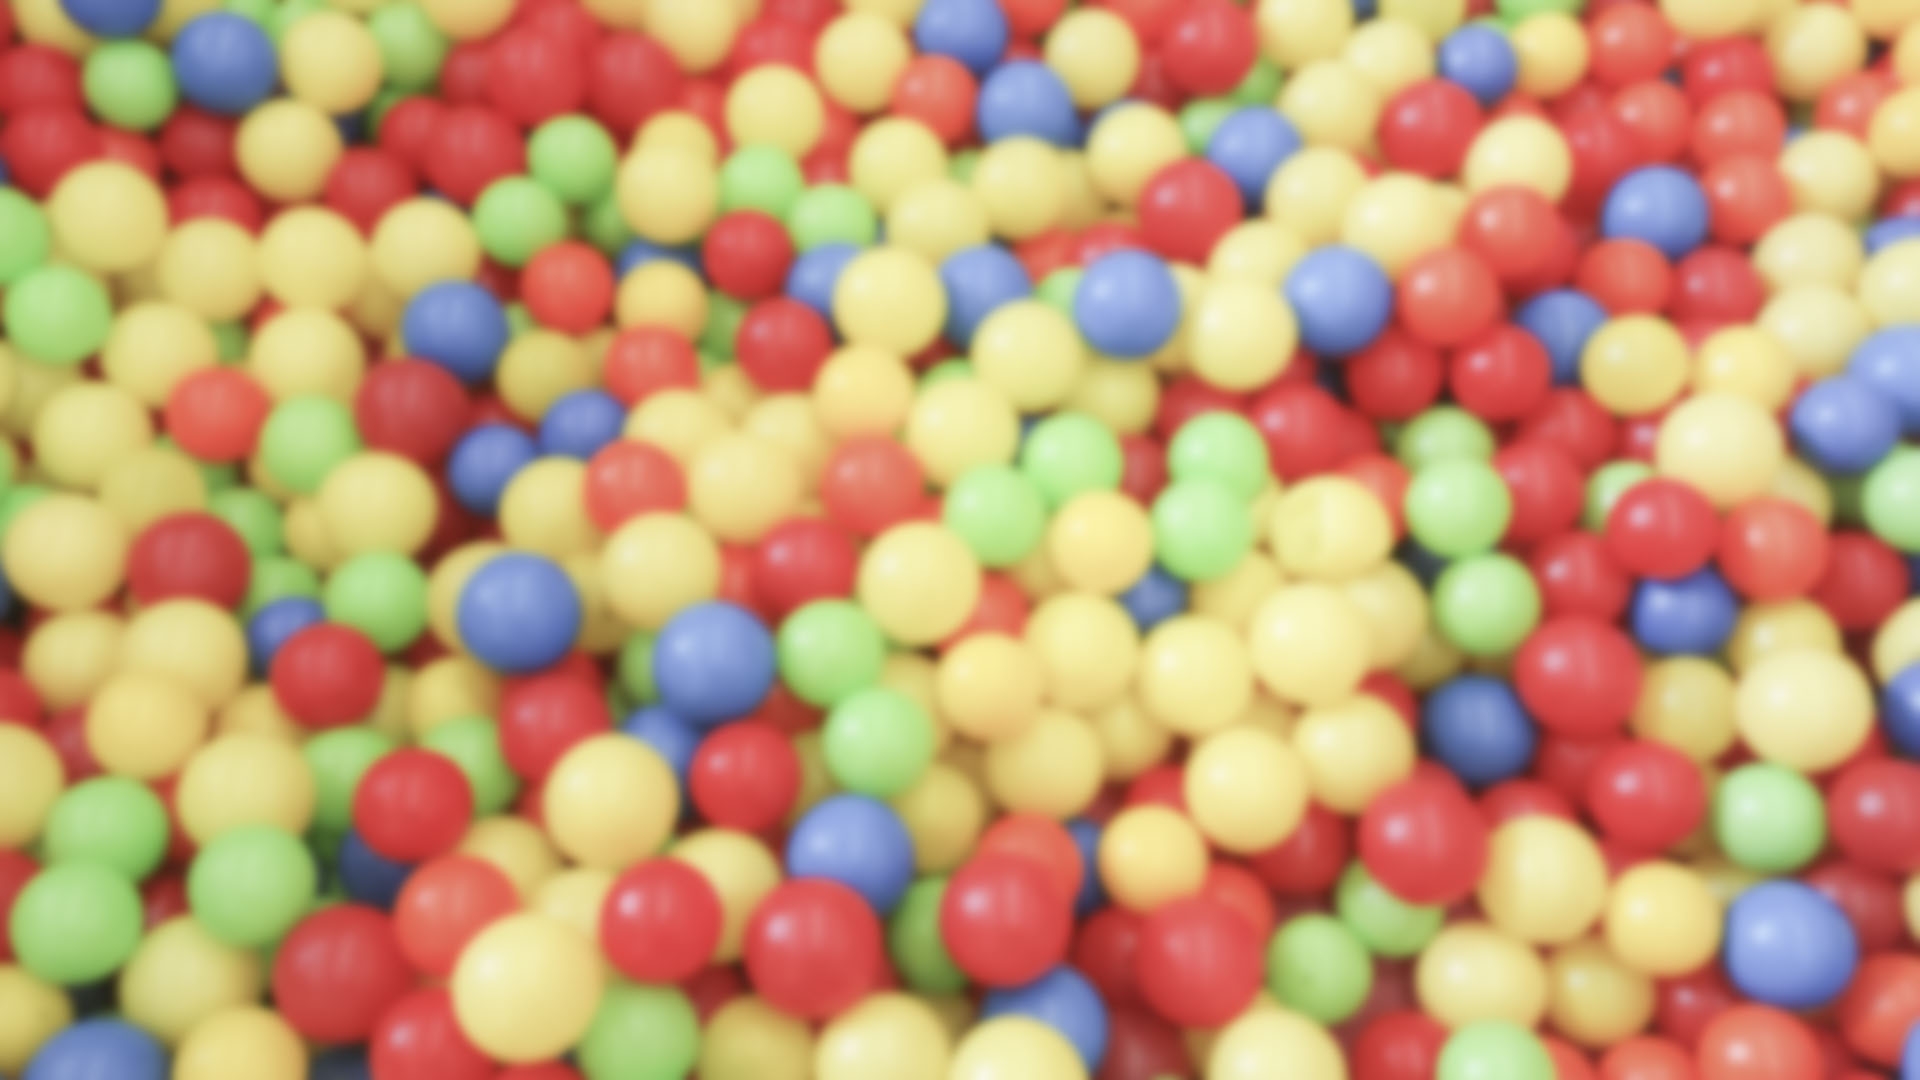 Defocused background with colorful plastic balls in children's playground pool